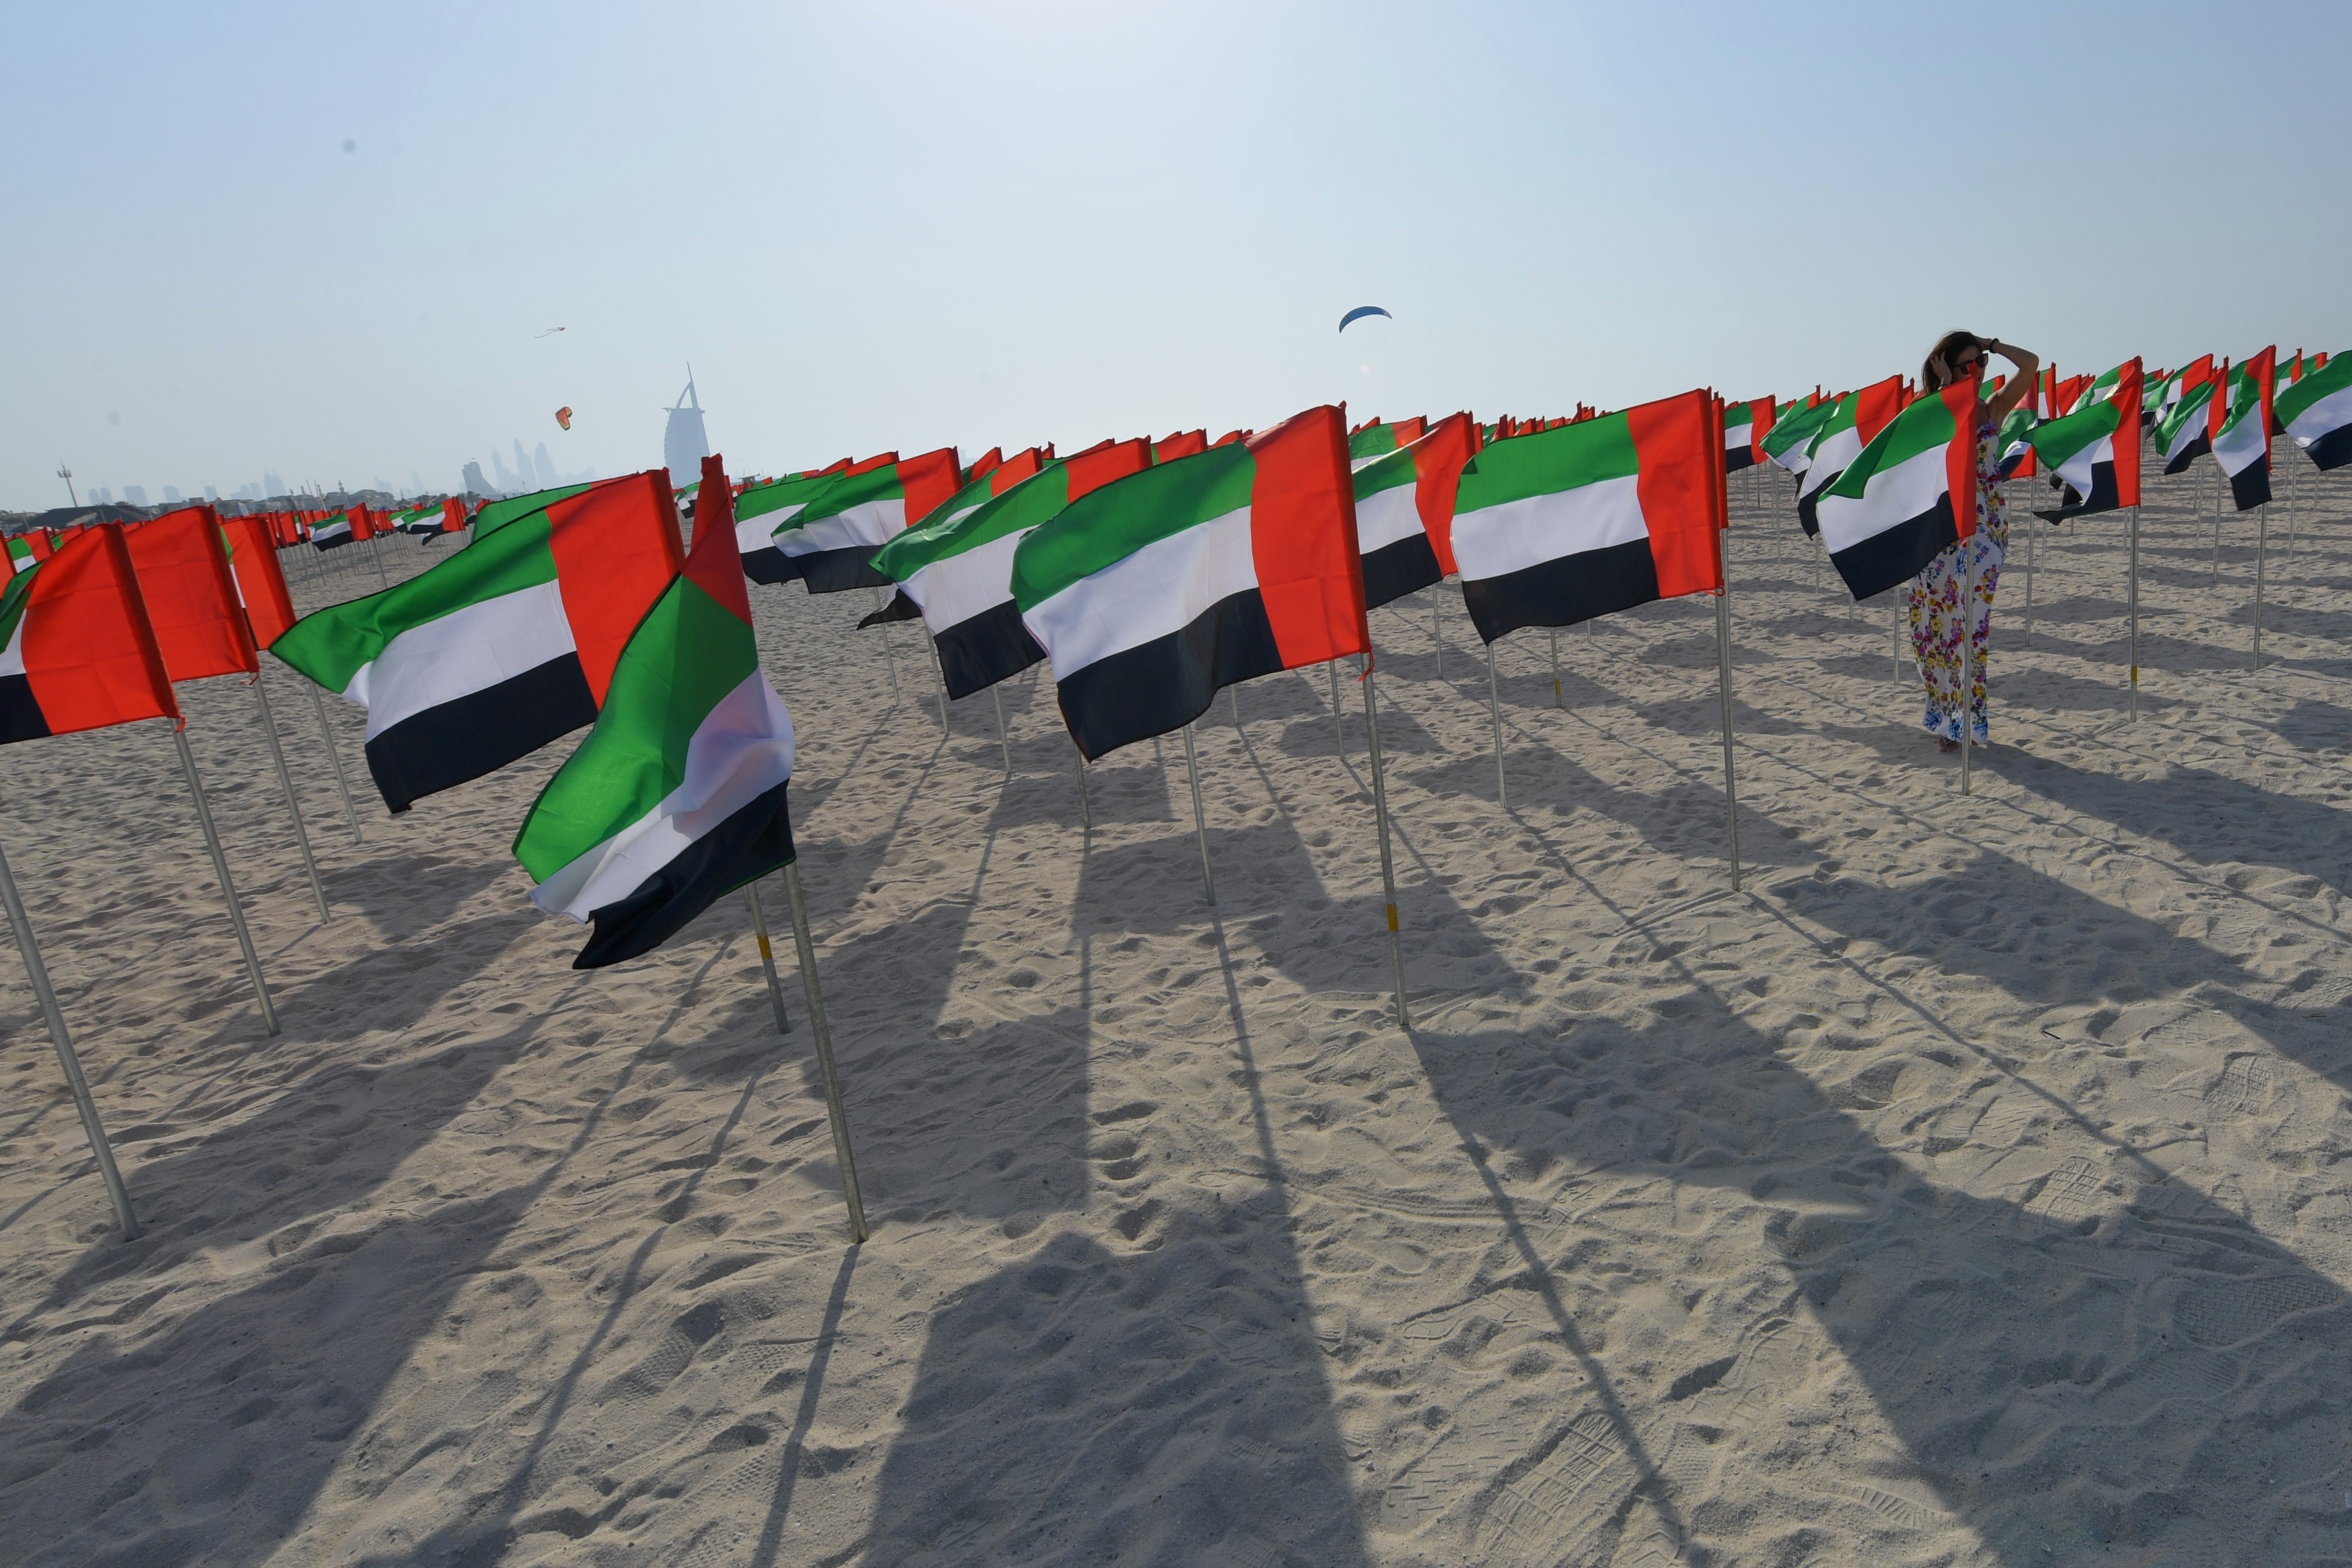 A girl poses next to UAE flags on the eve of the Flag Day at Kite Beach in Dubai on November 2, 2017